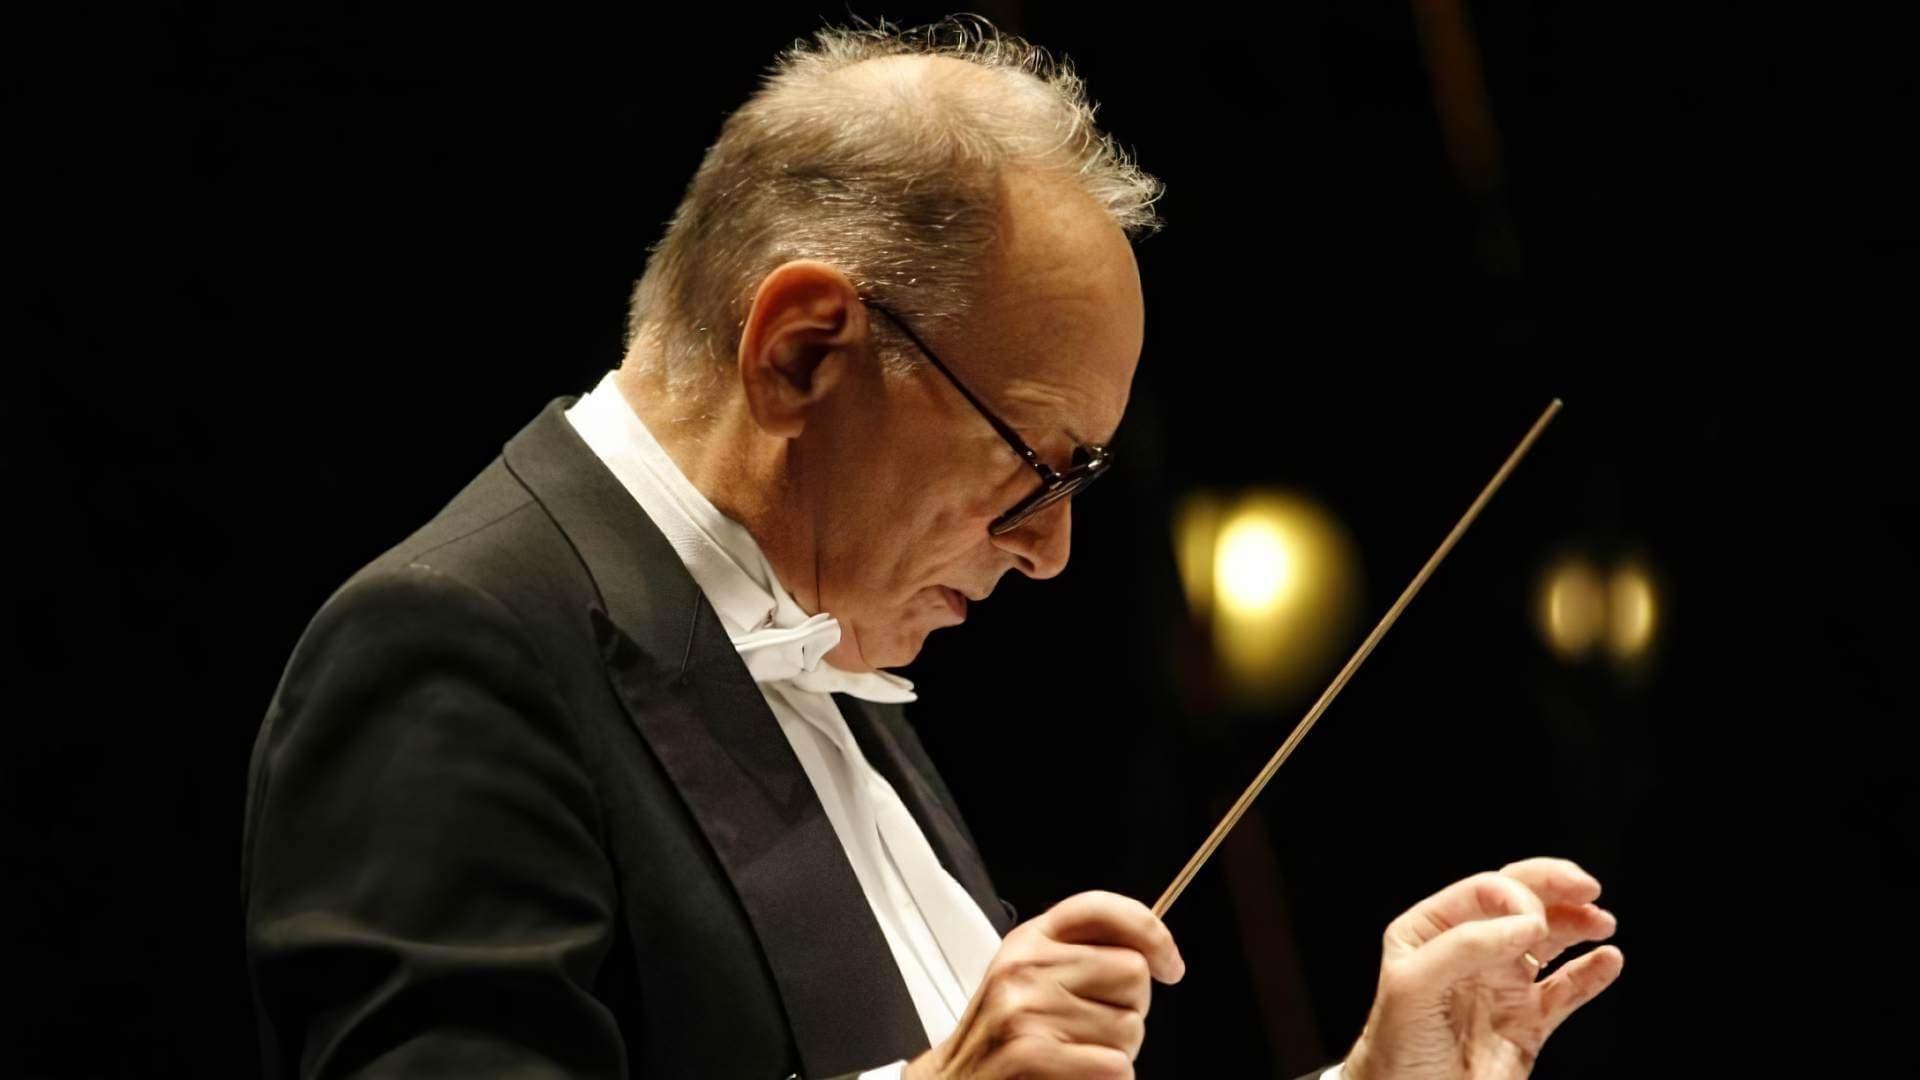 Morricone Conducts Morricone backdrop